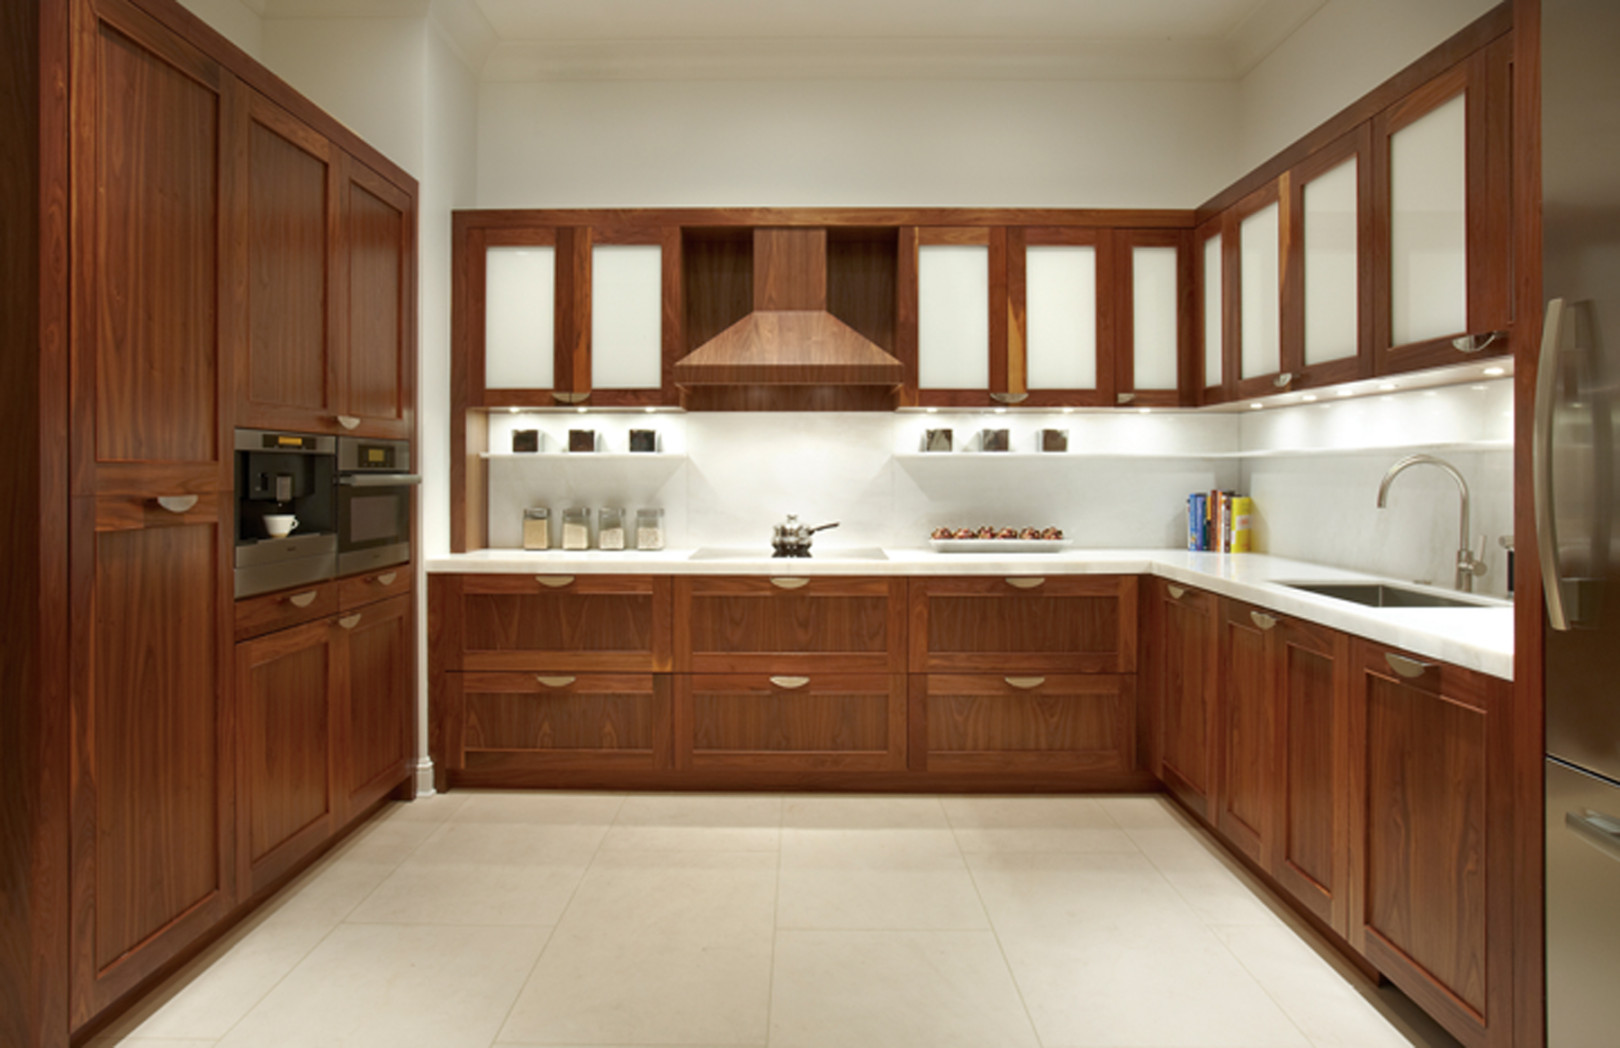 Check Out The Newest Kitchen Cabinet Designs In Pakistan!